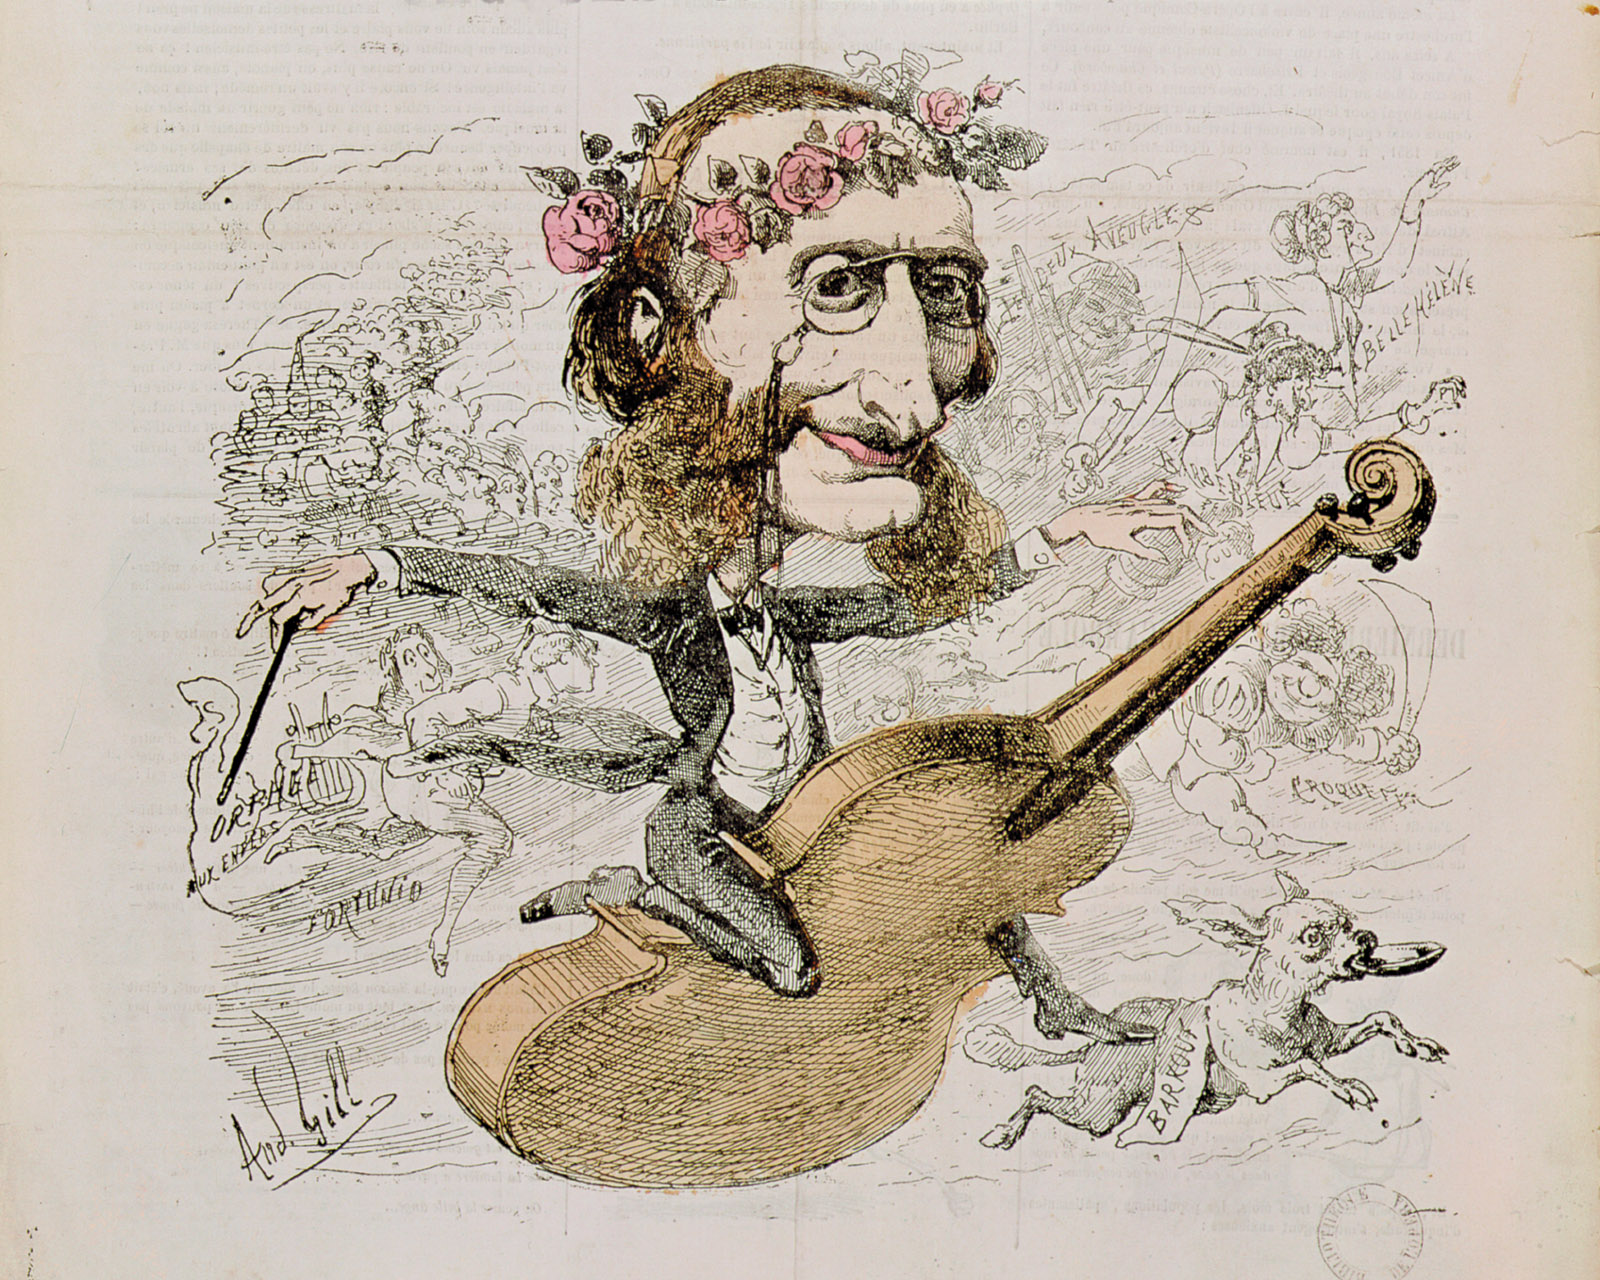 Jacques Offenbach; engraving by André Gill from the cover of La Lune, 1866